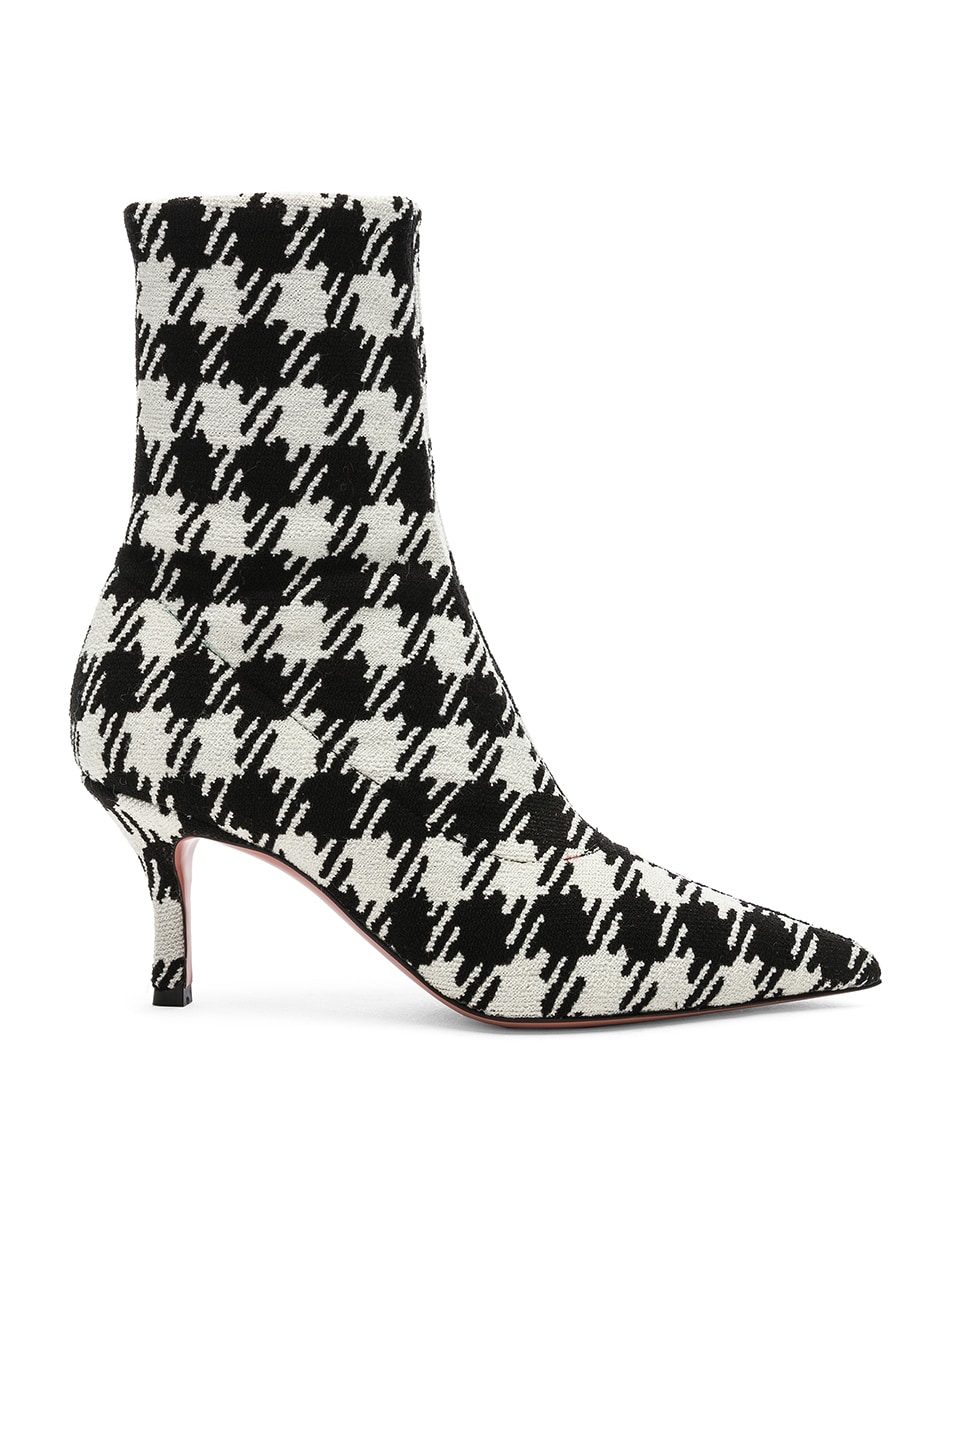 Image 1 of AMINA MUADDI Stretch Knit Lydia Ankle Boots in Houndstooth